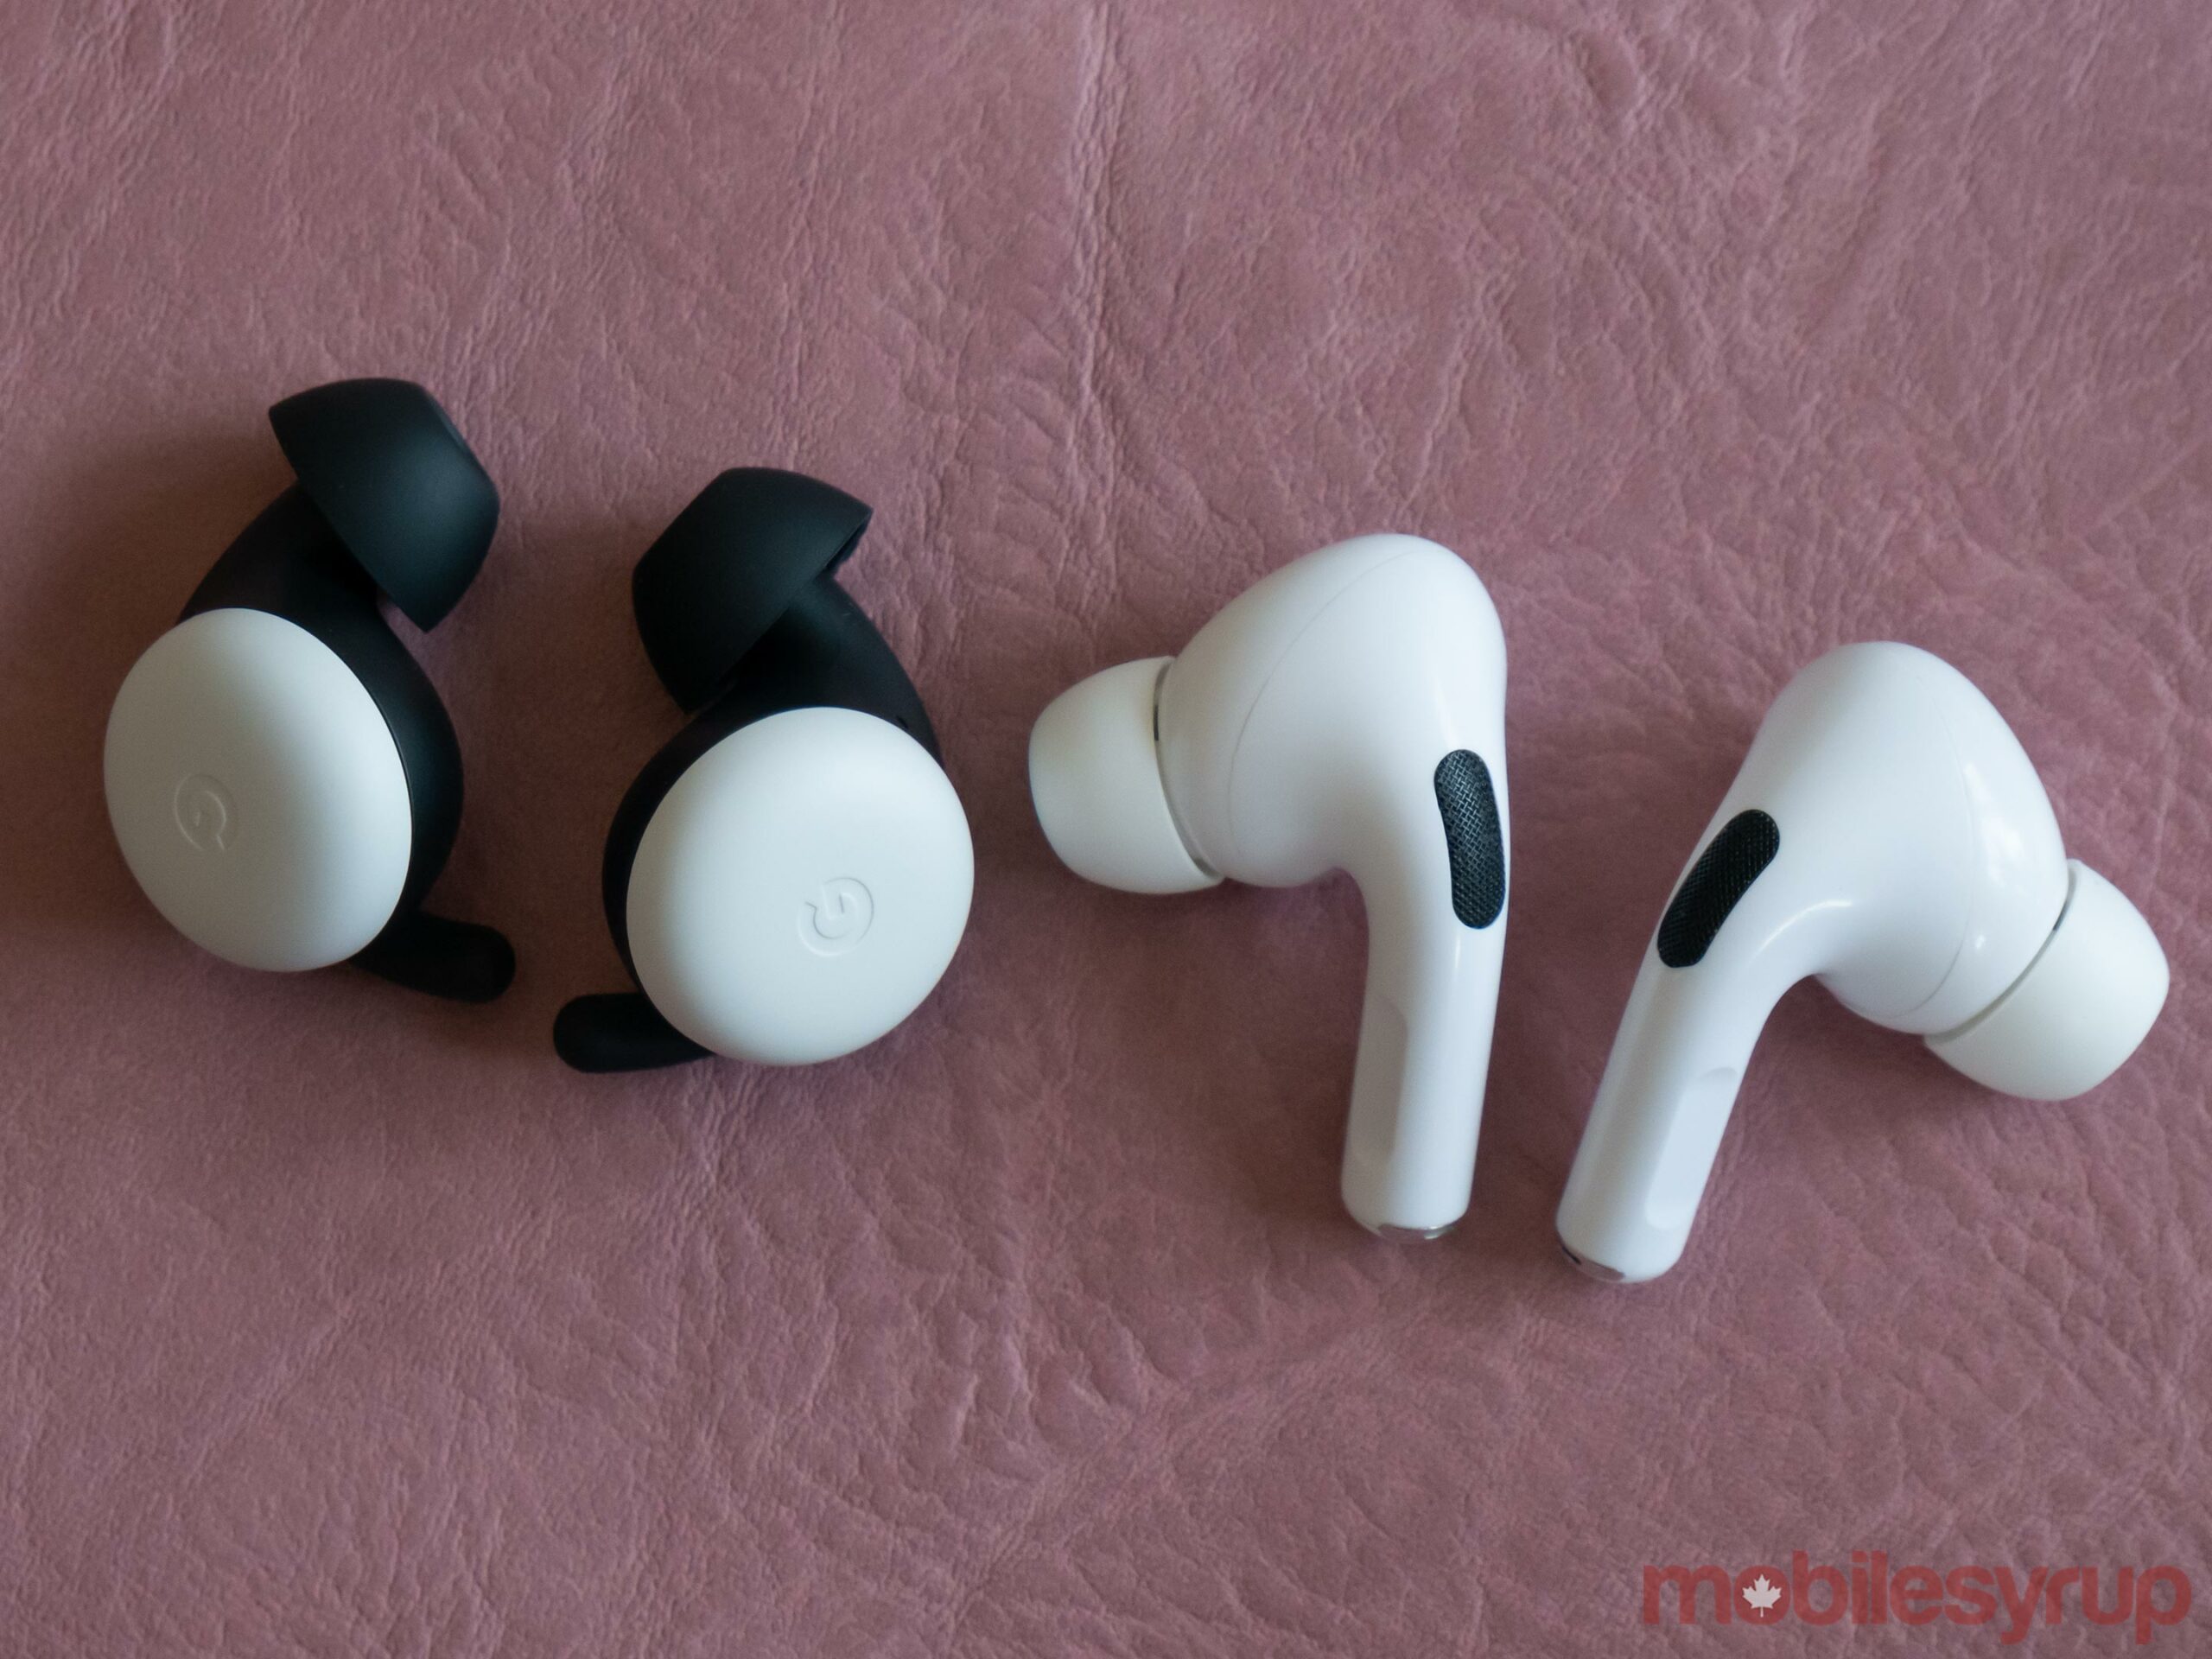 Pixel Buds 2020 beside AirPods Pro 